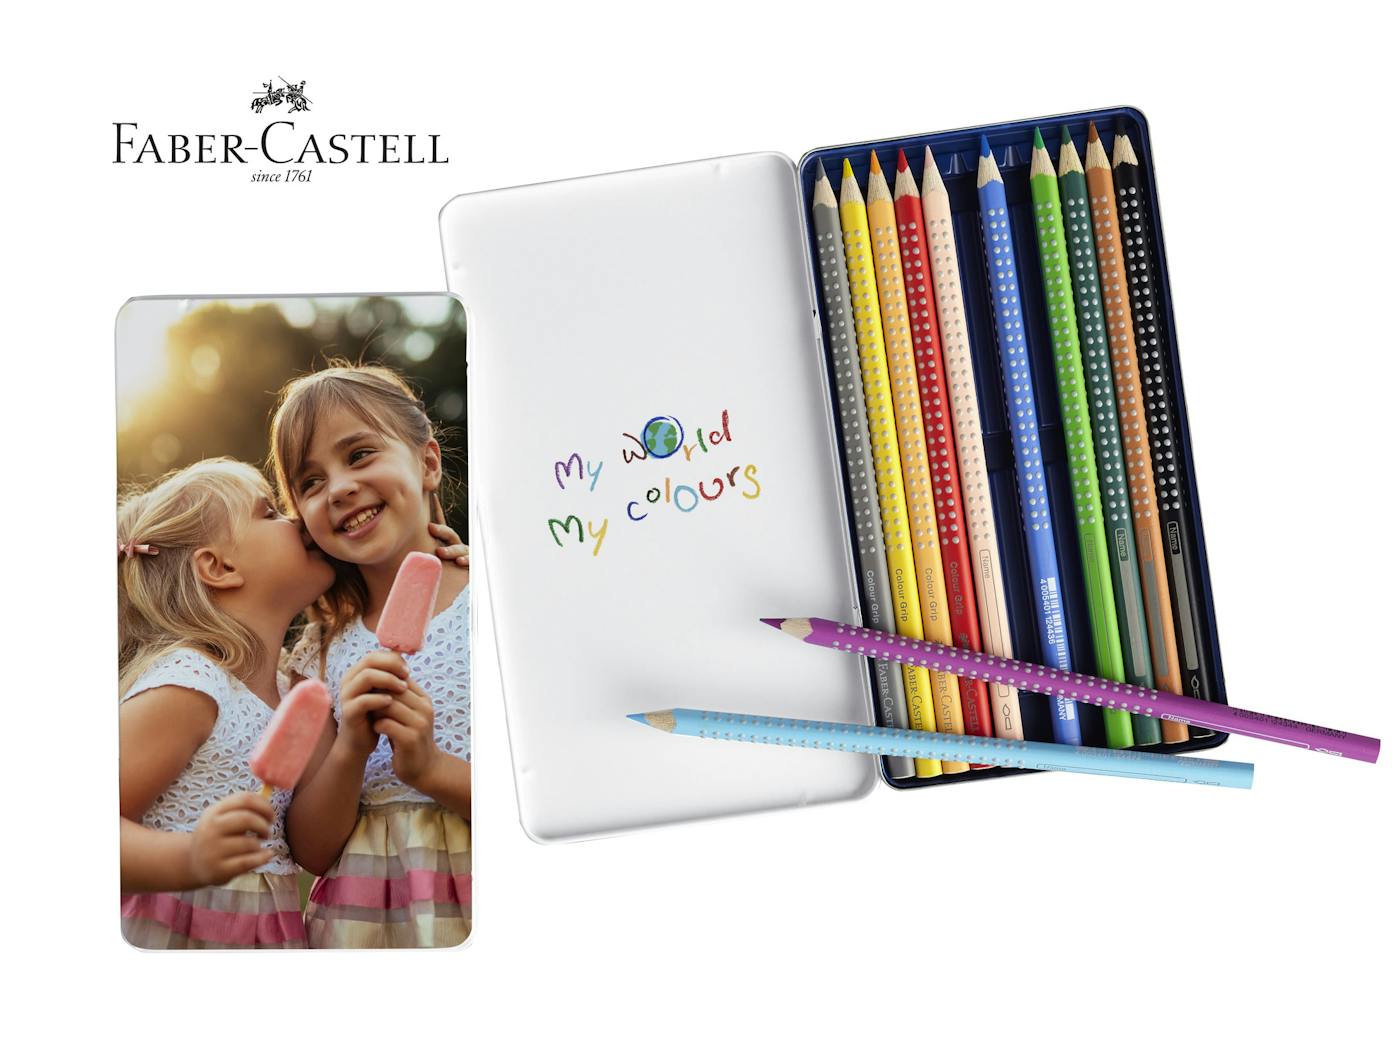 NEW: Faber-Castell Pencil Box